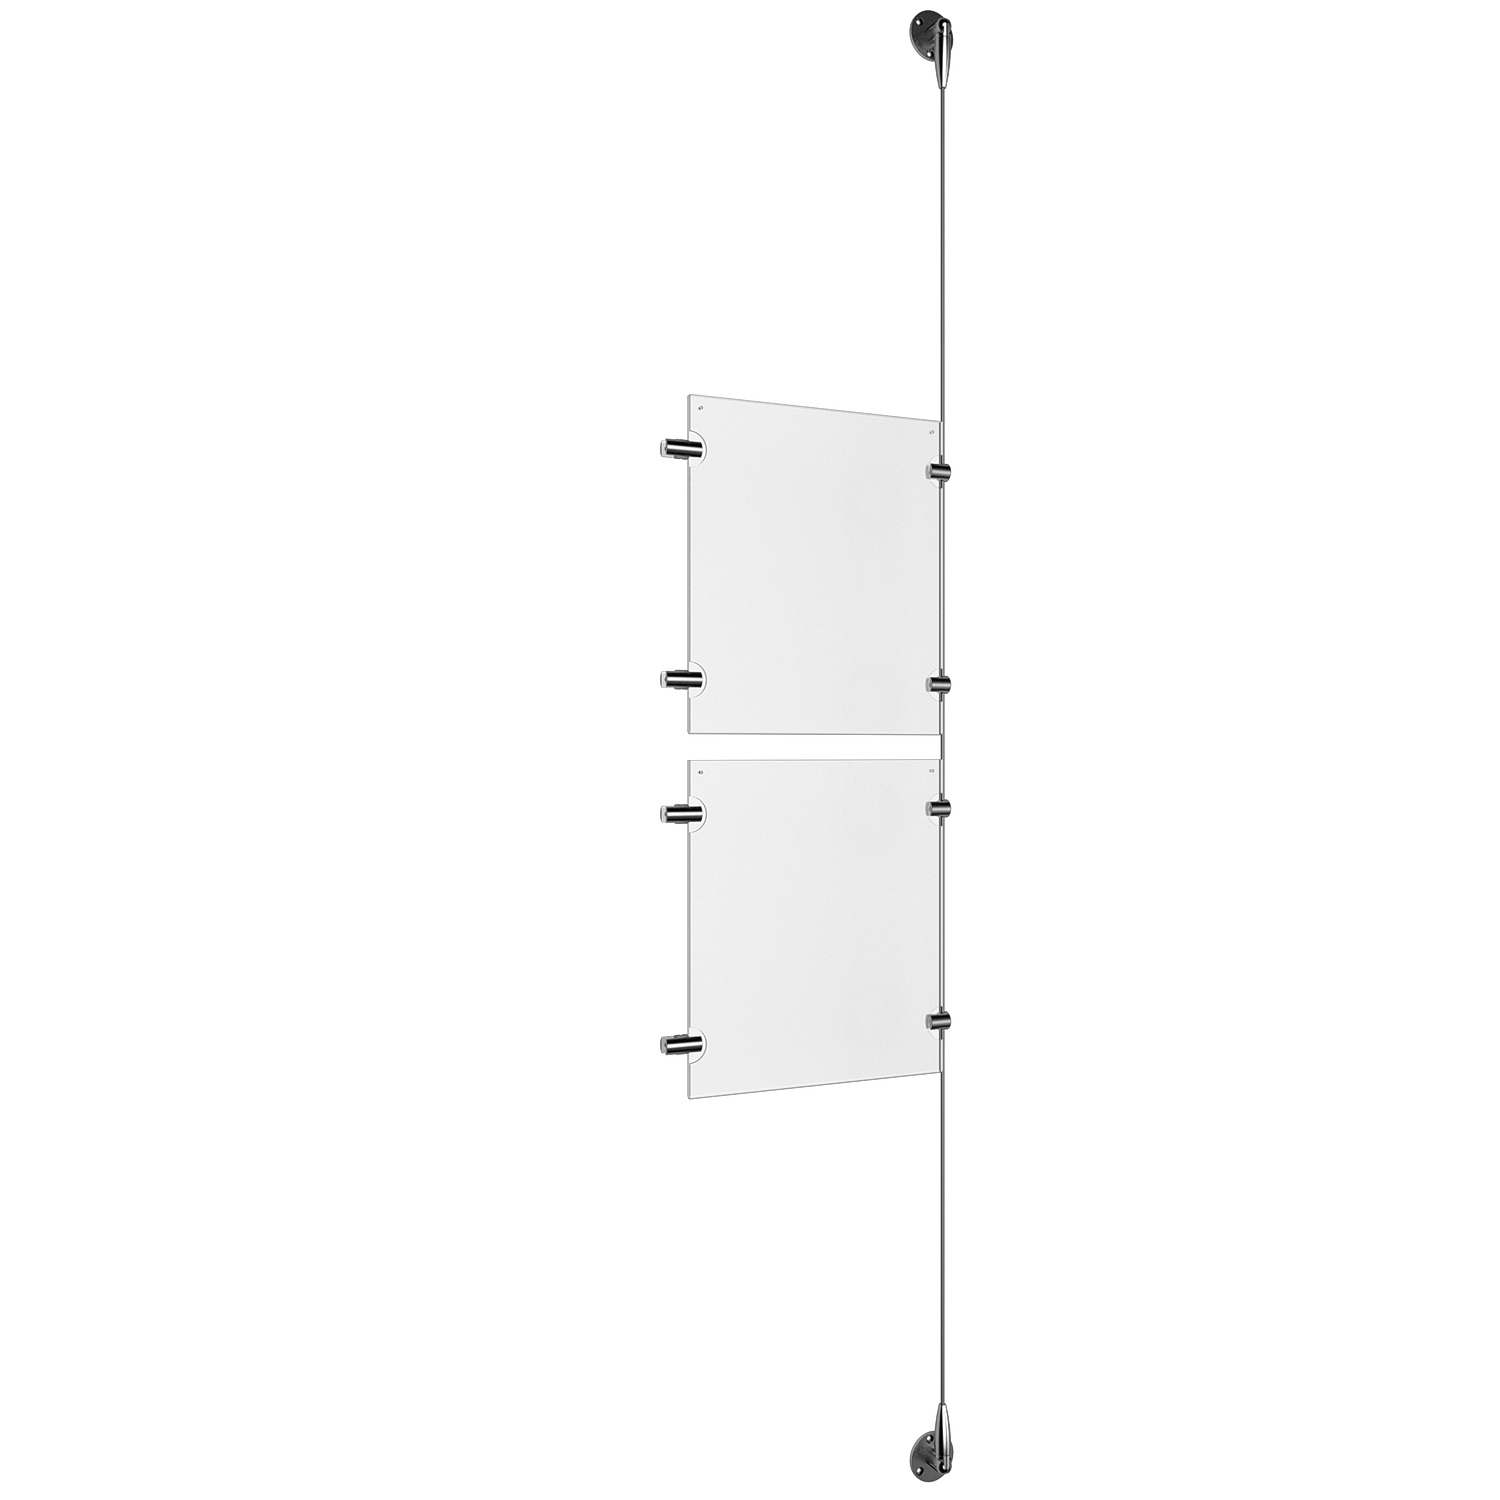 (2) 8-1/2'' Width x 11'' Height Clear Acrylic Frame & (1) Stainless Steel Satin Brushed Adjustable Angle Signature 1/8'' Cable Systems with (4) Single-Sided Panel Grippers (4) Double-Sided Panel Grippers